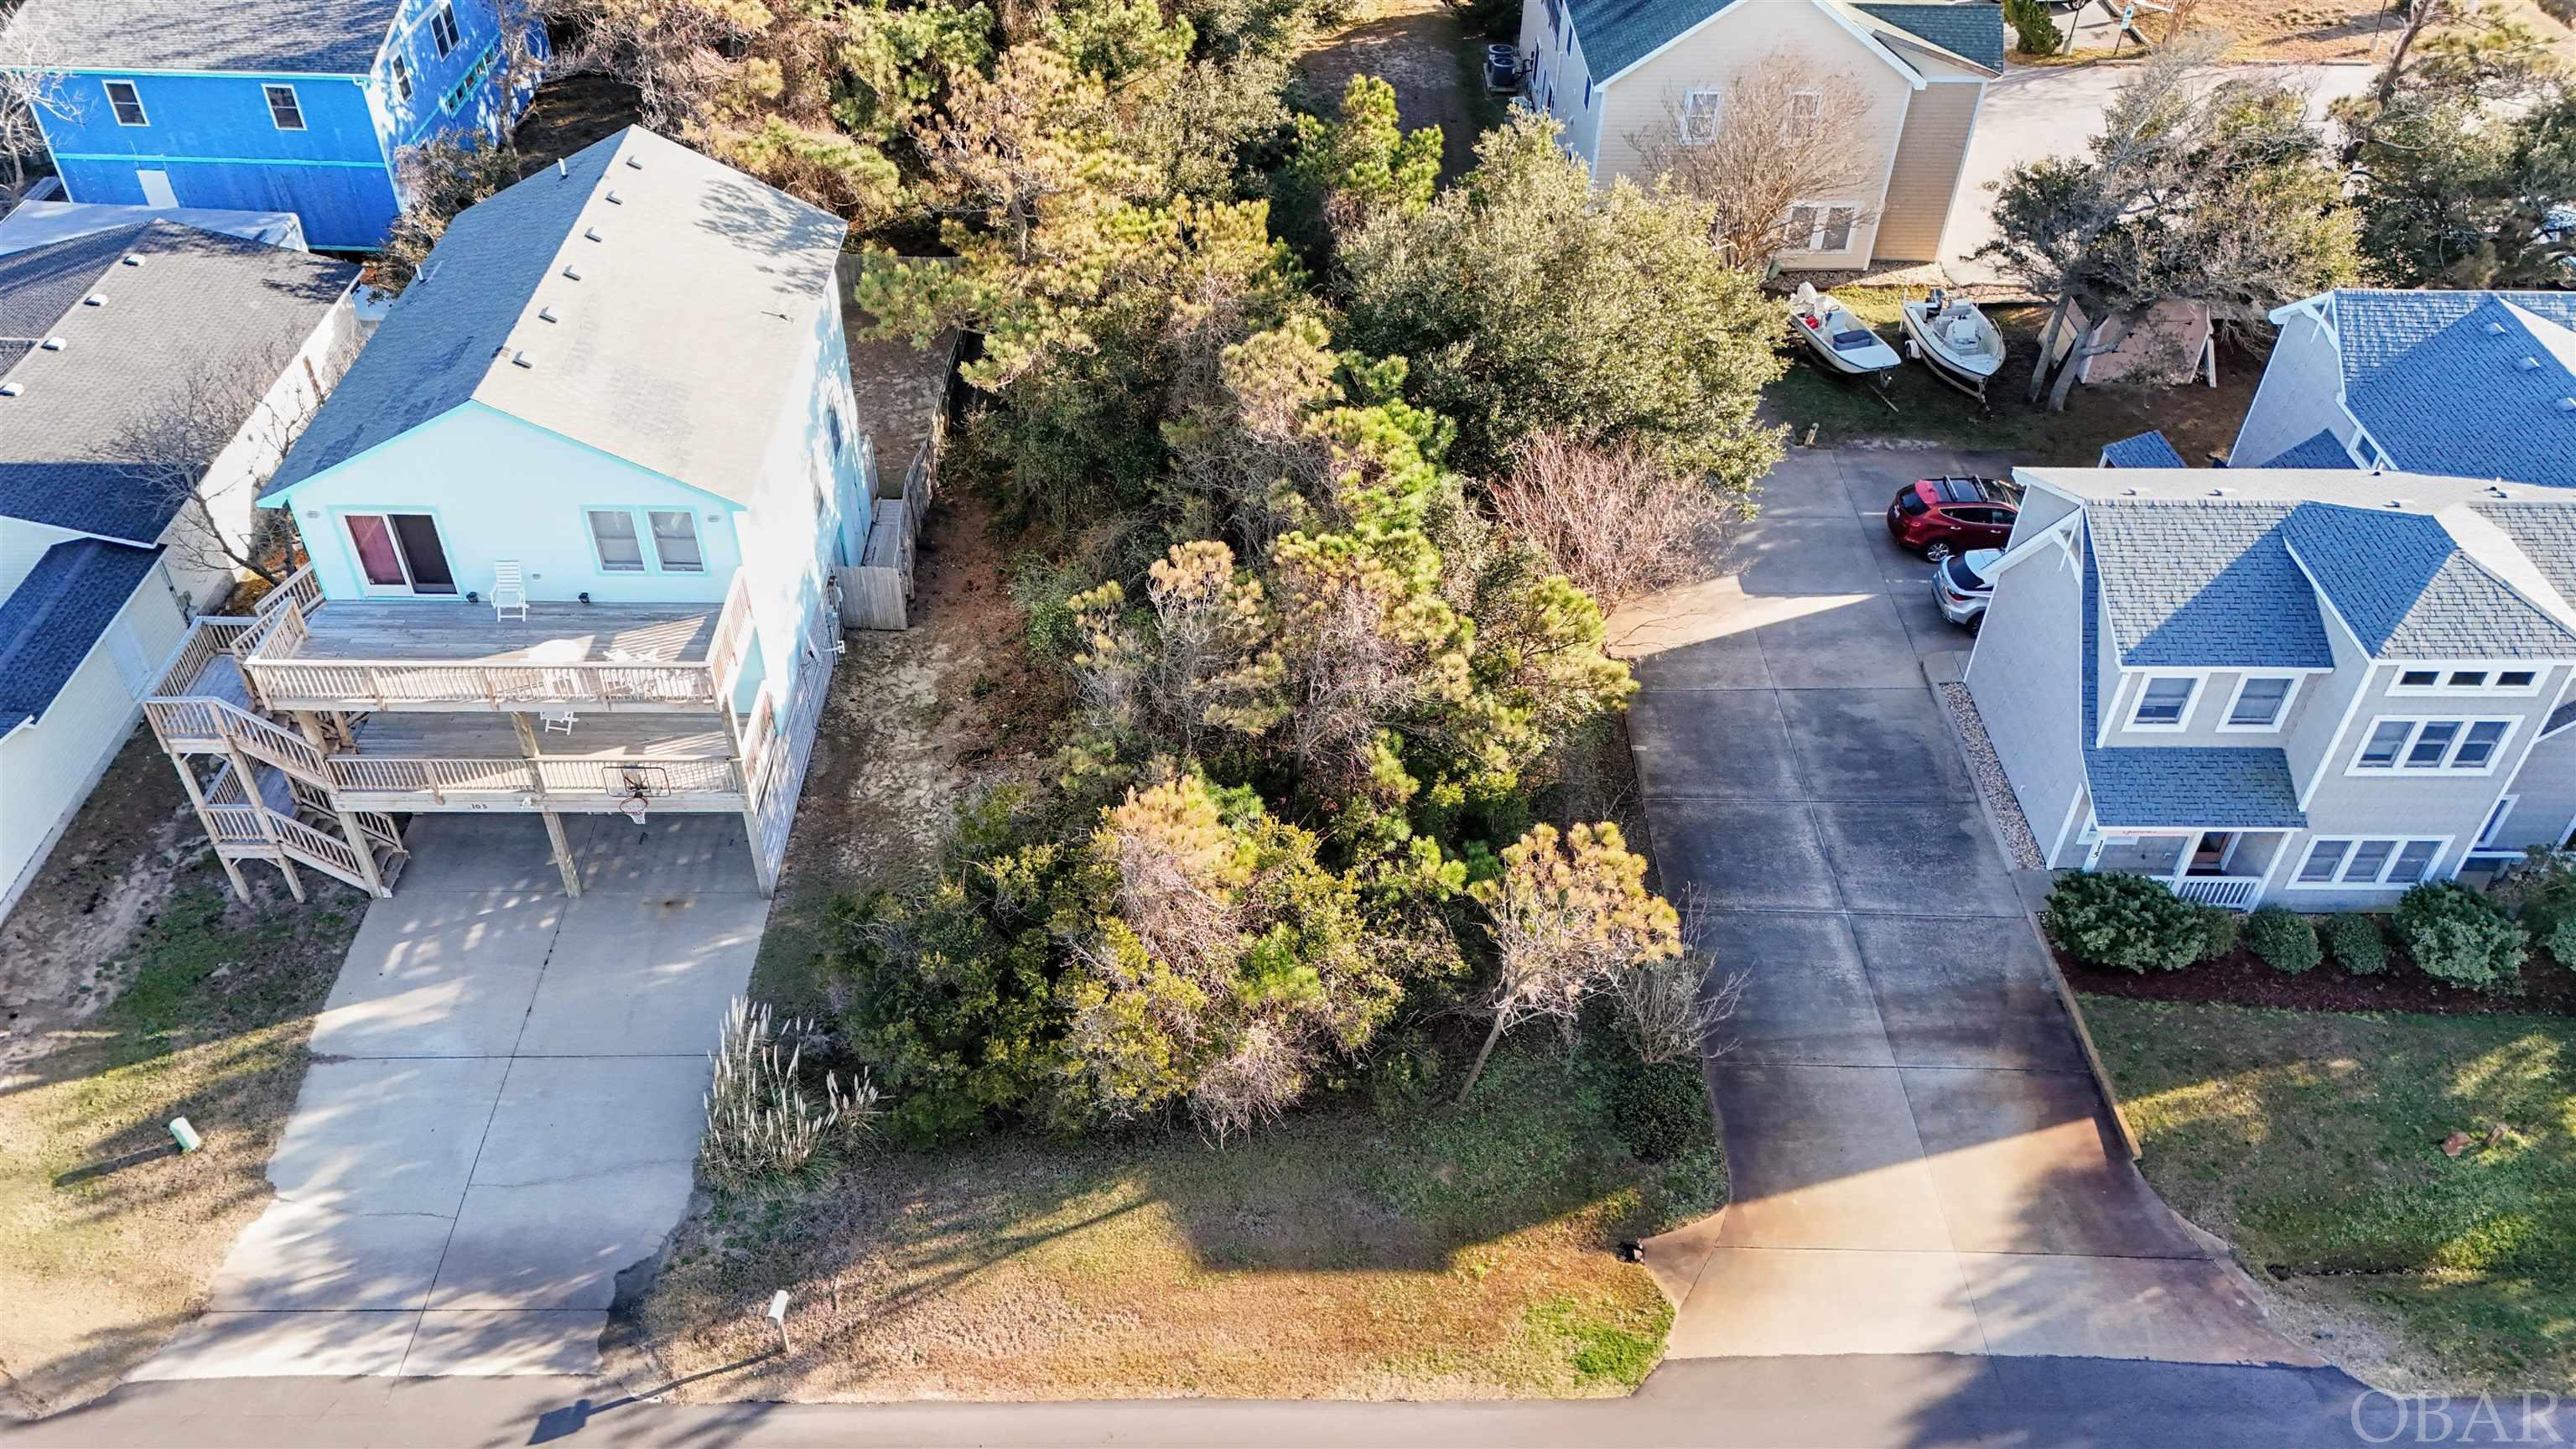 This lot is centrally located to everything that OBX offers!  Walking distance to schools, Dare Co Rec Ct, Dare Co Public Library, KDH Post Office, Baum center, Wright Brothers Monument and airport, bakery, restaurants, beach access, parks and dog park.  With the ability of 65% lot coverage, should be plenty of room for a pool.  There are a mix of vacation rental homes, 2nd homes, and commercial on this street.  You can also build a house and put an ADU (Accessory Dwelling Unit) on back side of lot. Many possibilities of use for this lot.  Although zoned commercial, this lot does not meet the square footage requirements (15,000 sq ft) for a commercial construction.